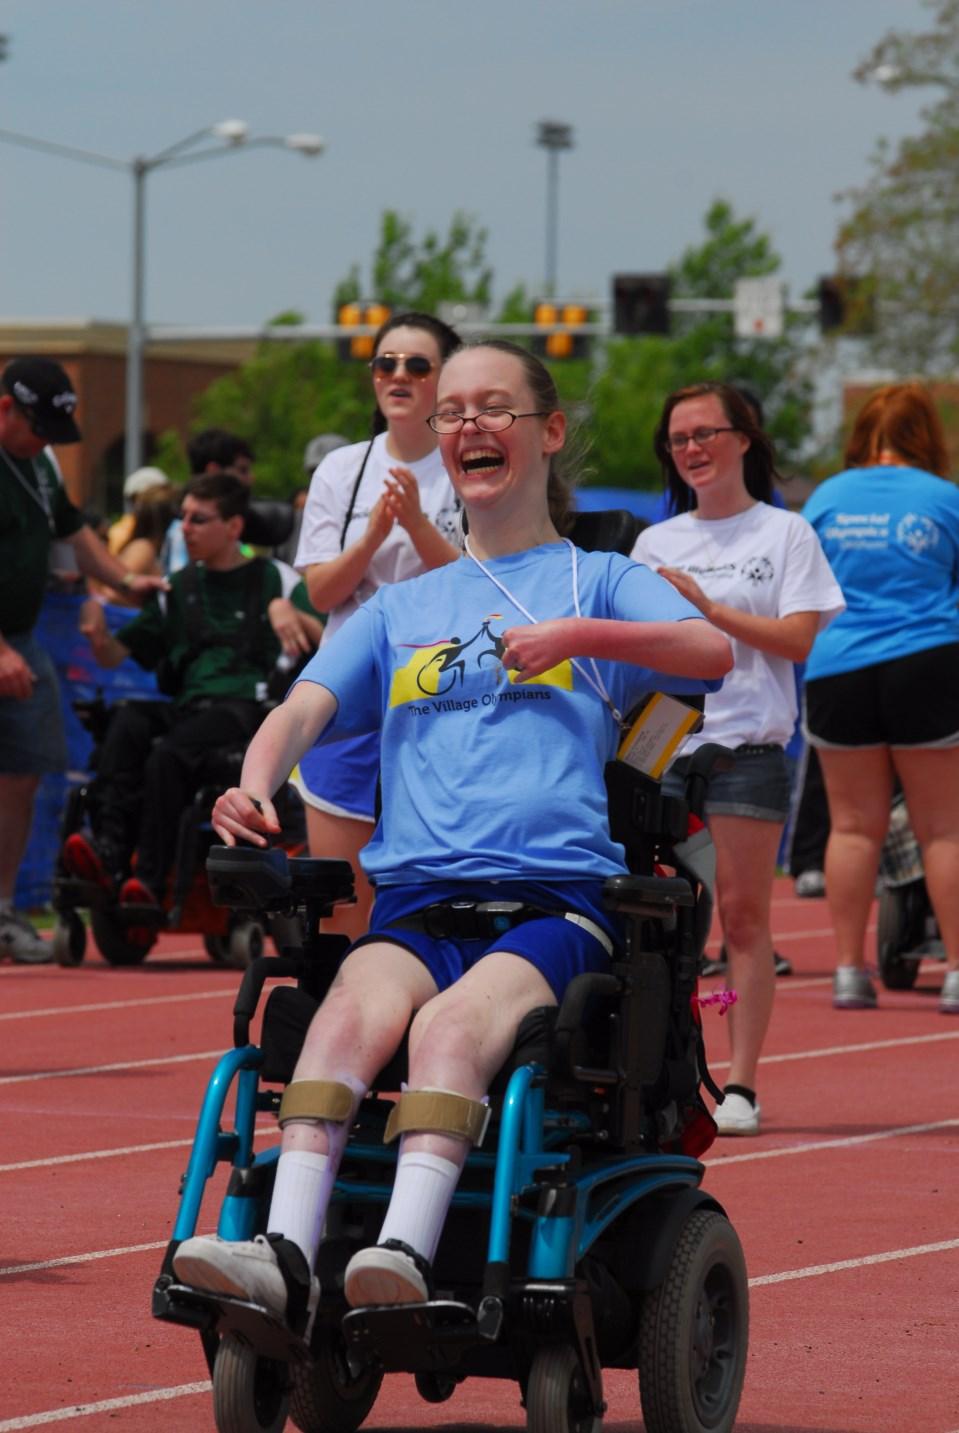 Organization Overview For 48 years, Special Olympics Oklahoma has provided life-changing sports, health, and education programs for thousands of children and adults with intellectual disabilities